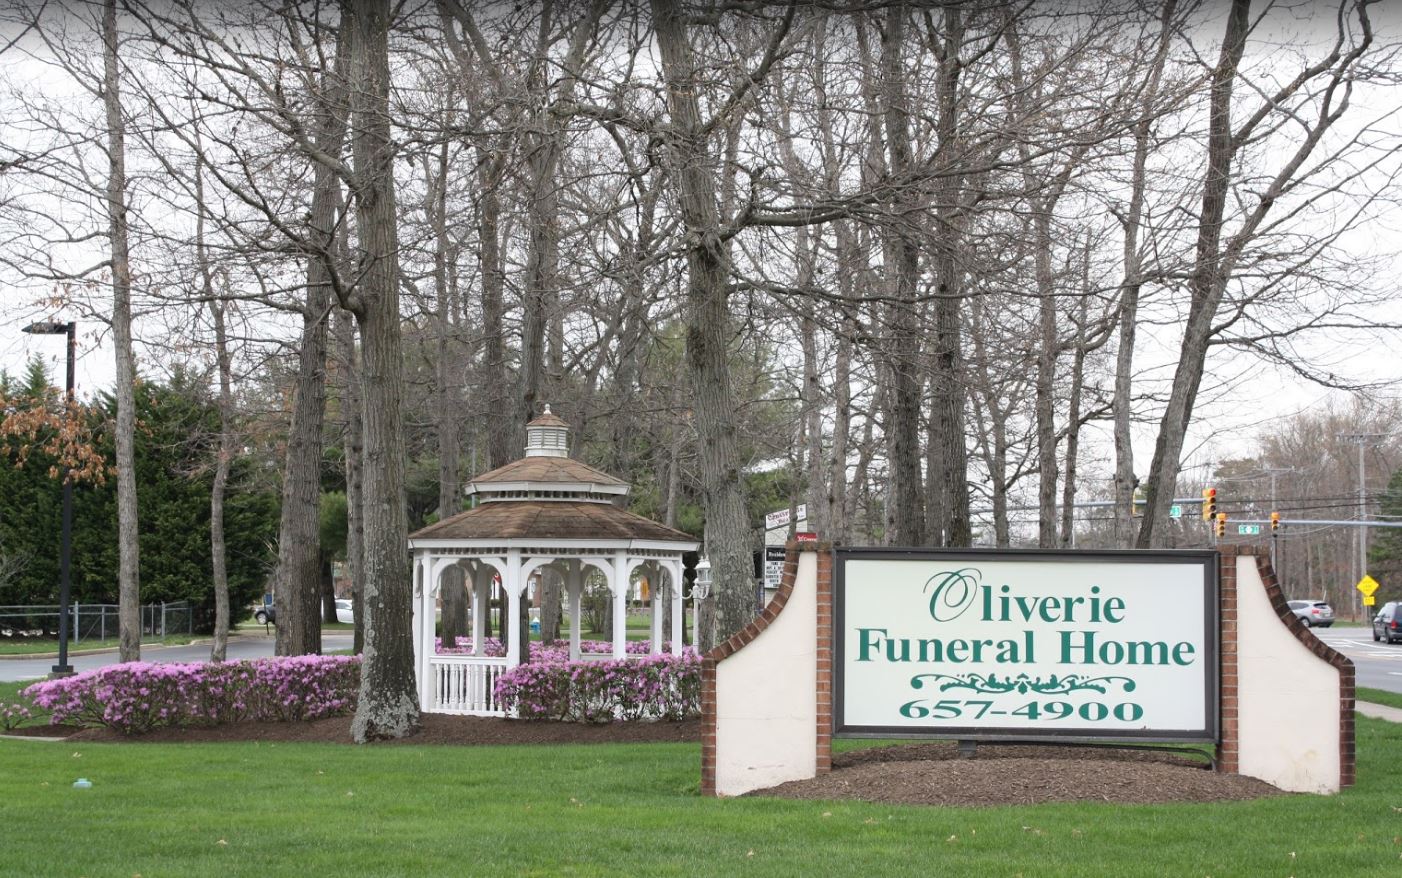 Oliverie Funeral Home